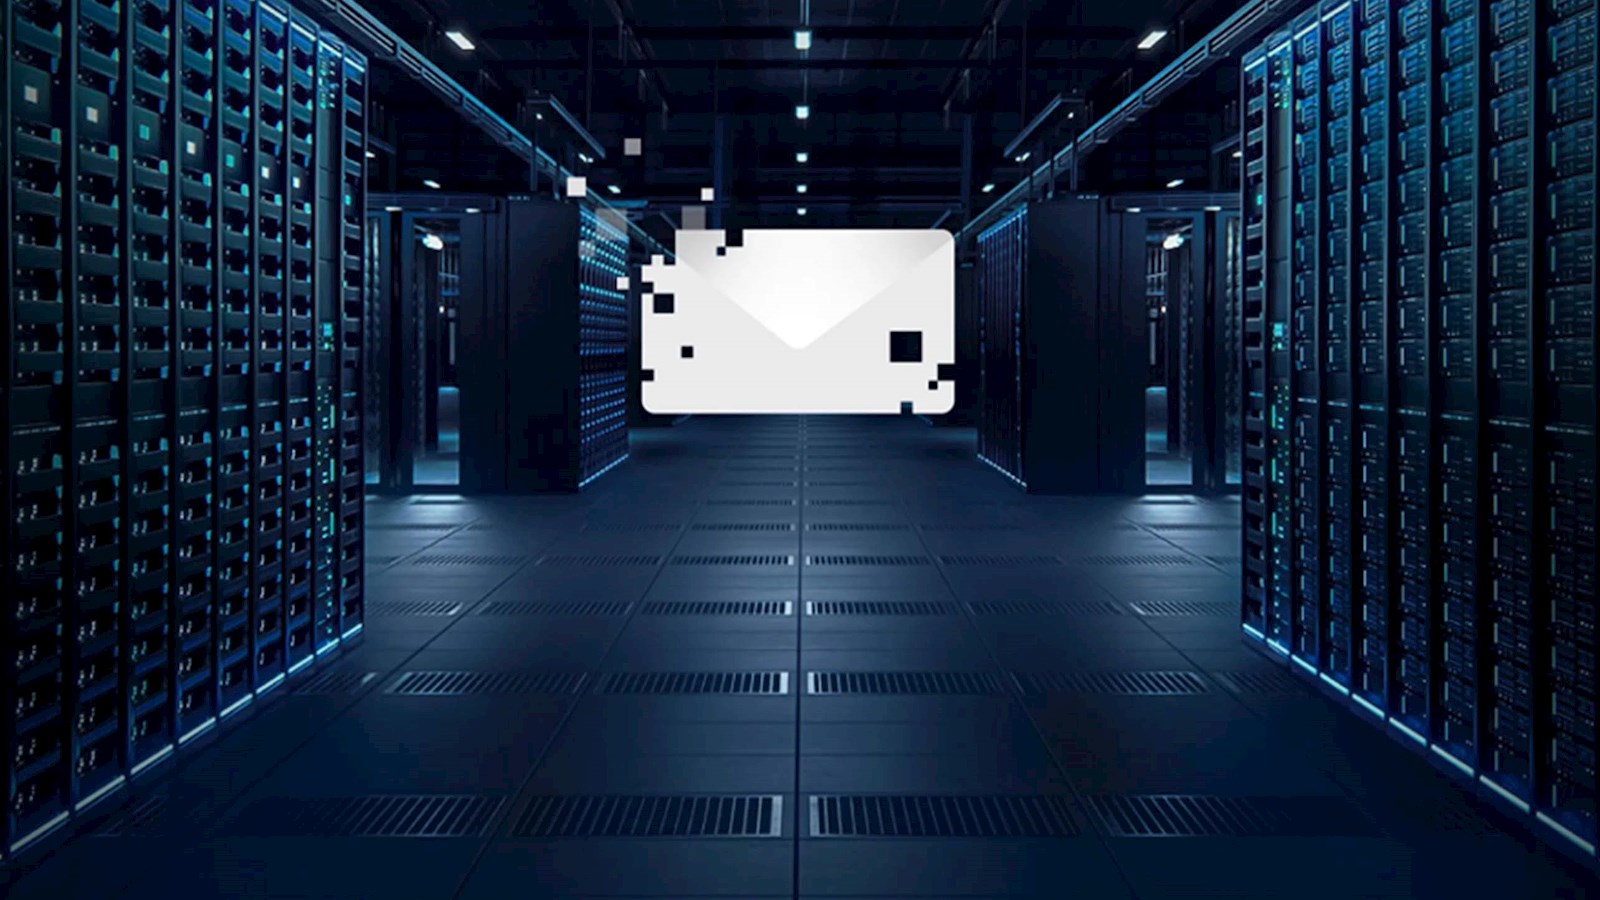 Perspective shot looking down a server room with an email icon in the middle